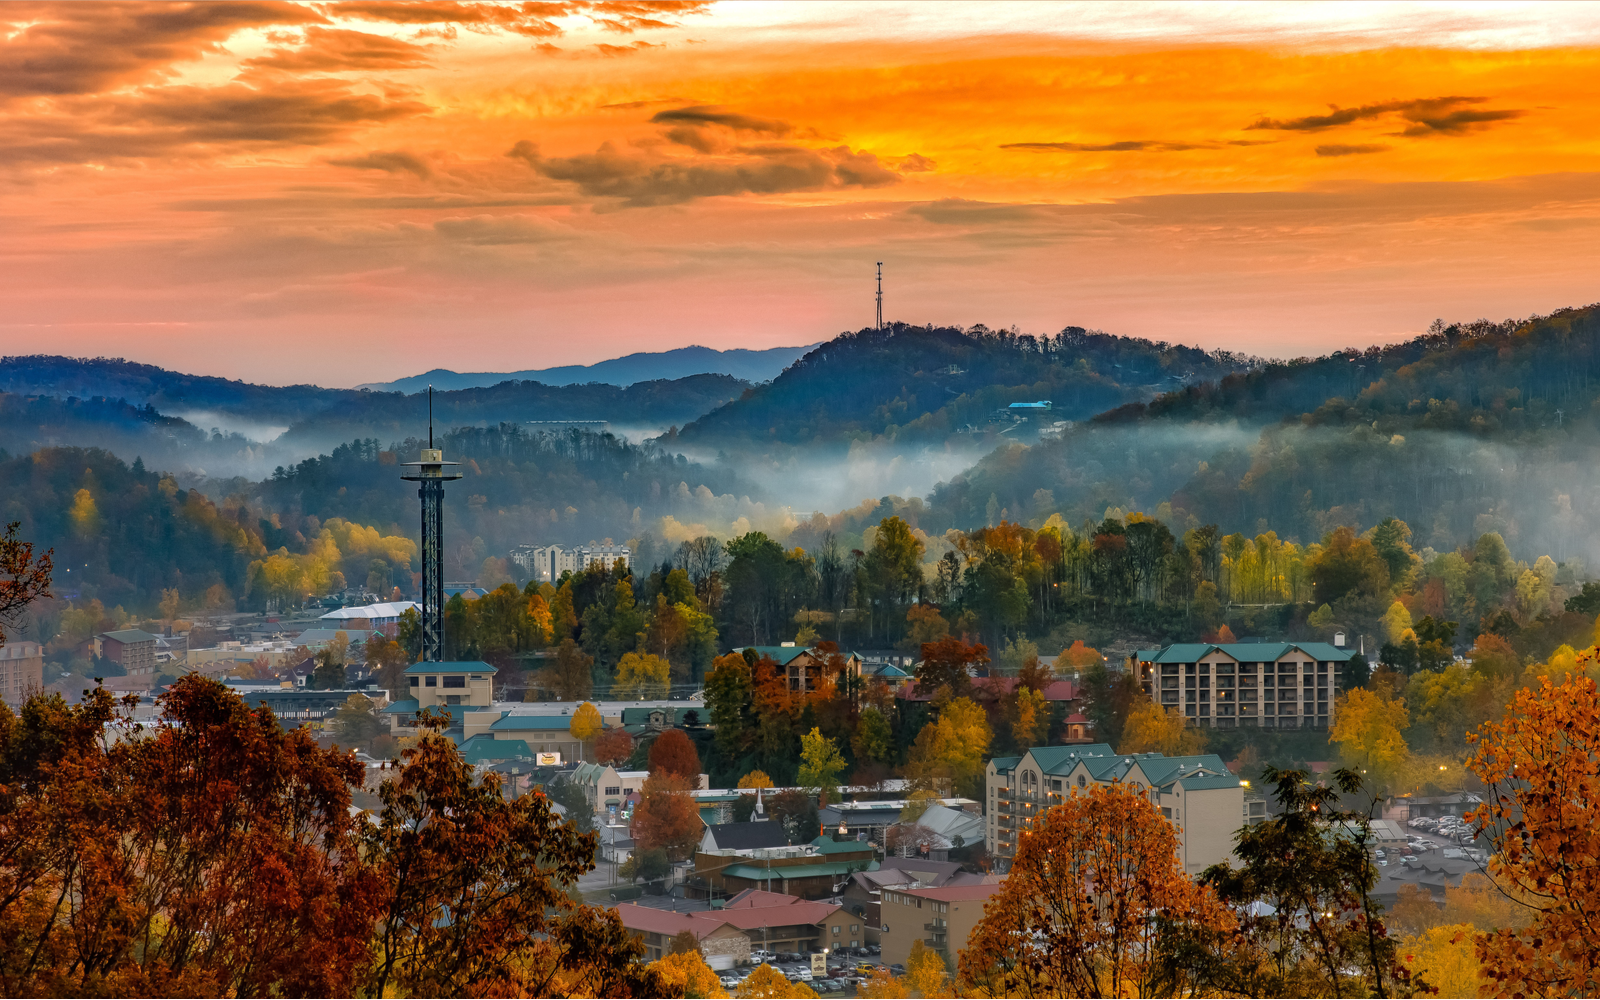 City skyline with an orange sky above the smoky mountains for a piece titled Best Things to Do in Gatlinburg Tennessee